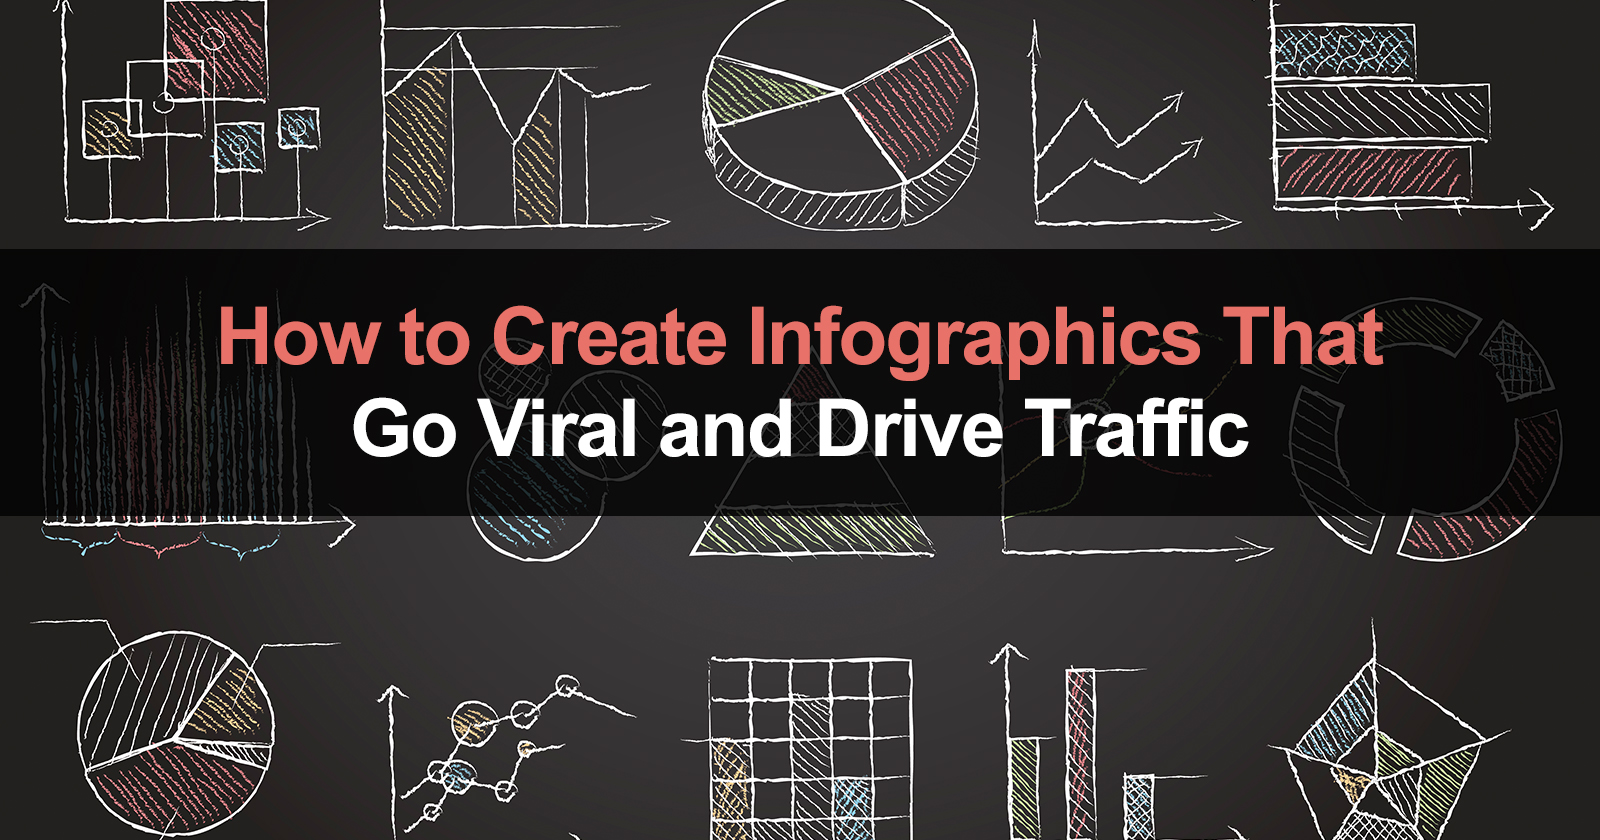 how-to-create-infographics-that-go-viral-and-drive-traffic-jason-hennessey.jpg